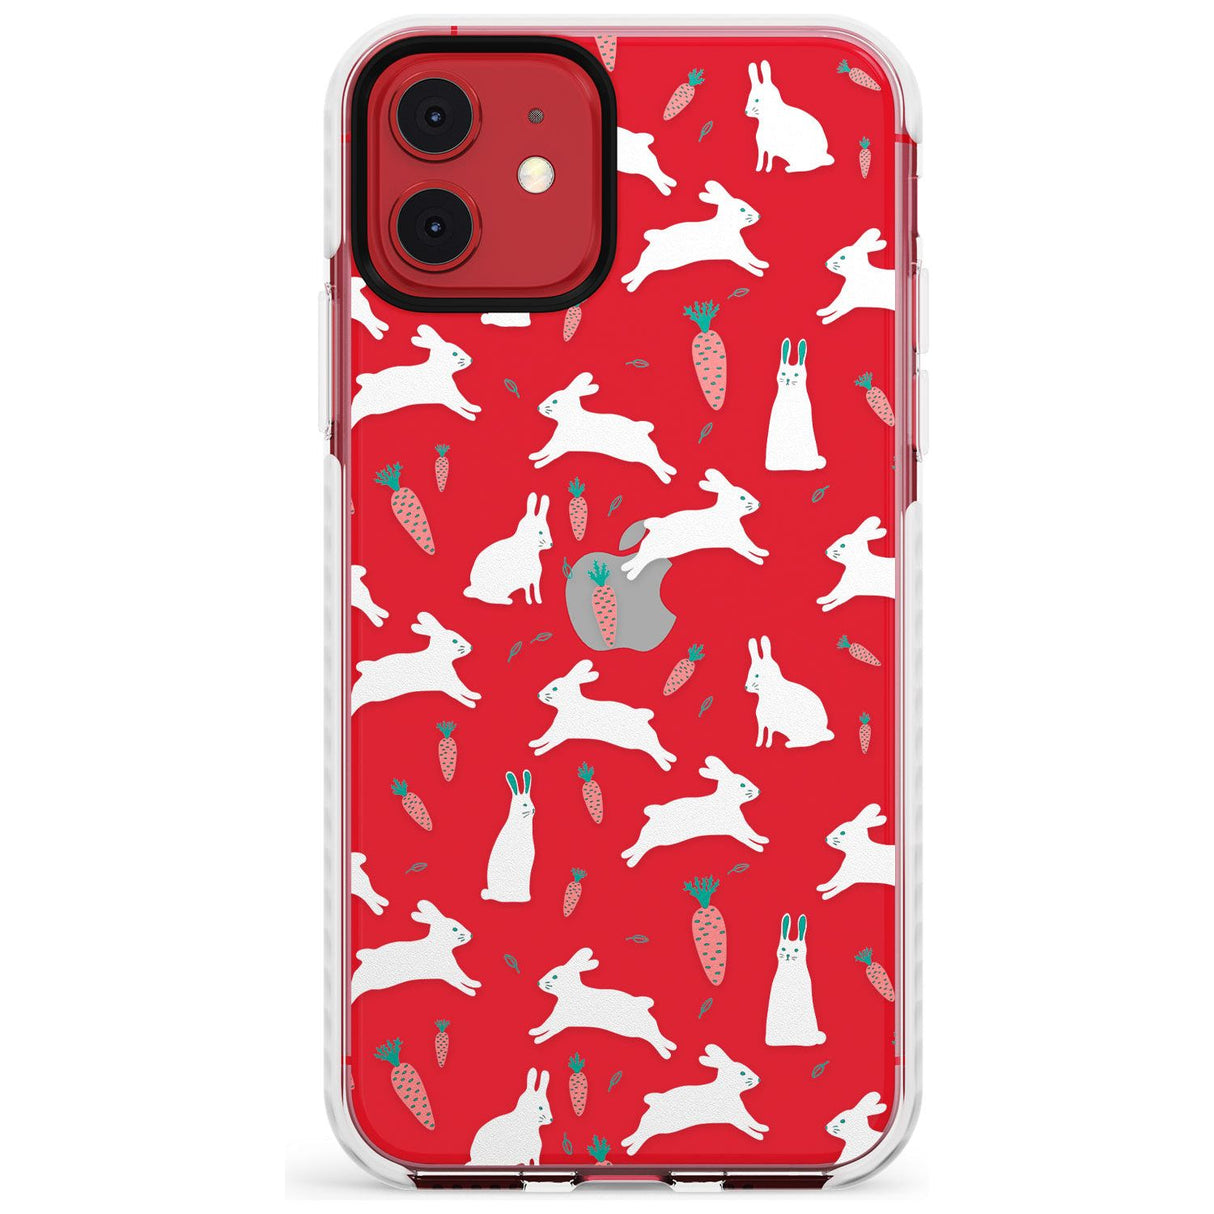 White Bunnies and Carrots Impact Phone Case for iPhone 11